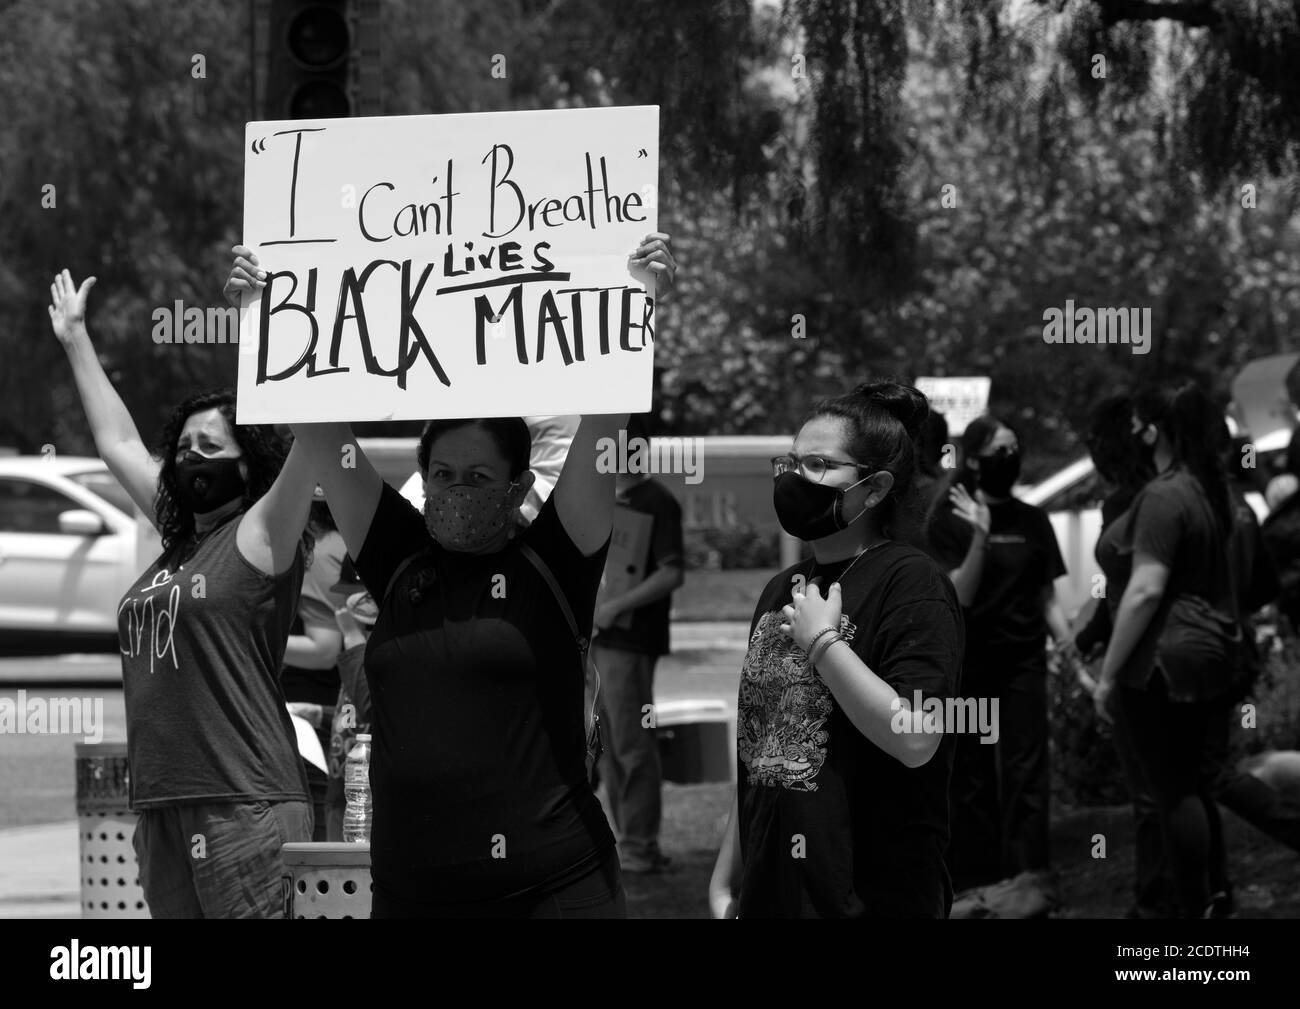 2020 CALIFORNIA USA May 30: Black lives matter protest in Southern California. Crowd of people at the political rally and demonstrating. Stock Photo